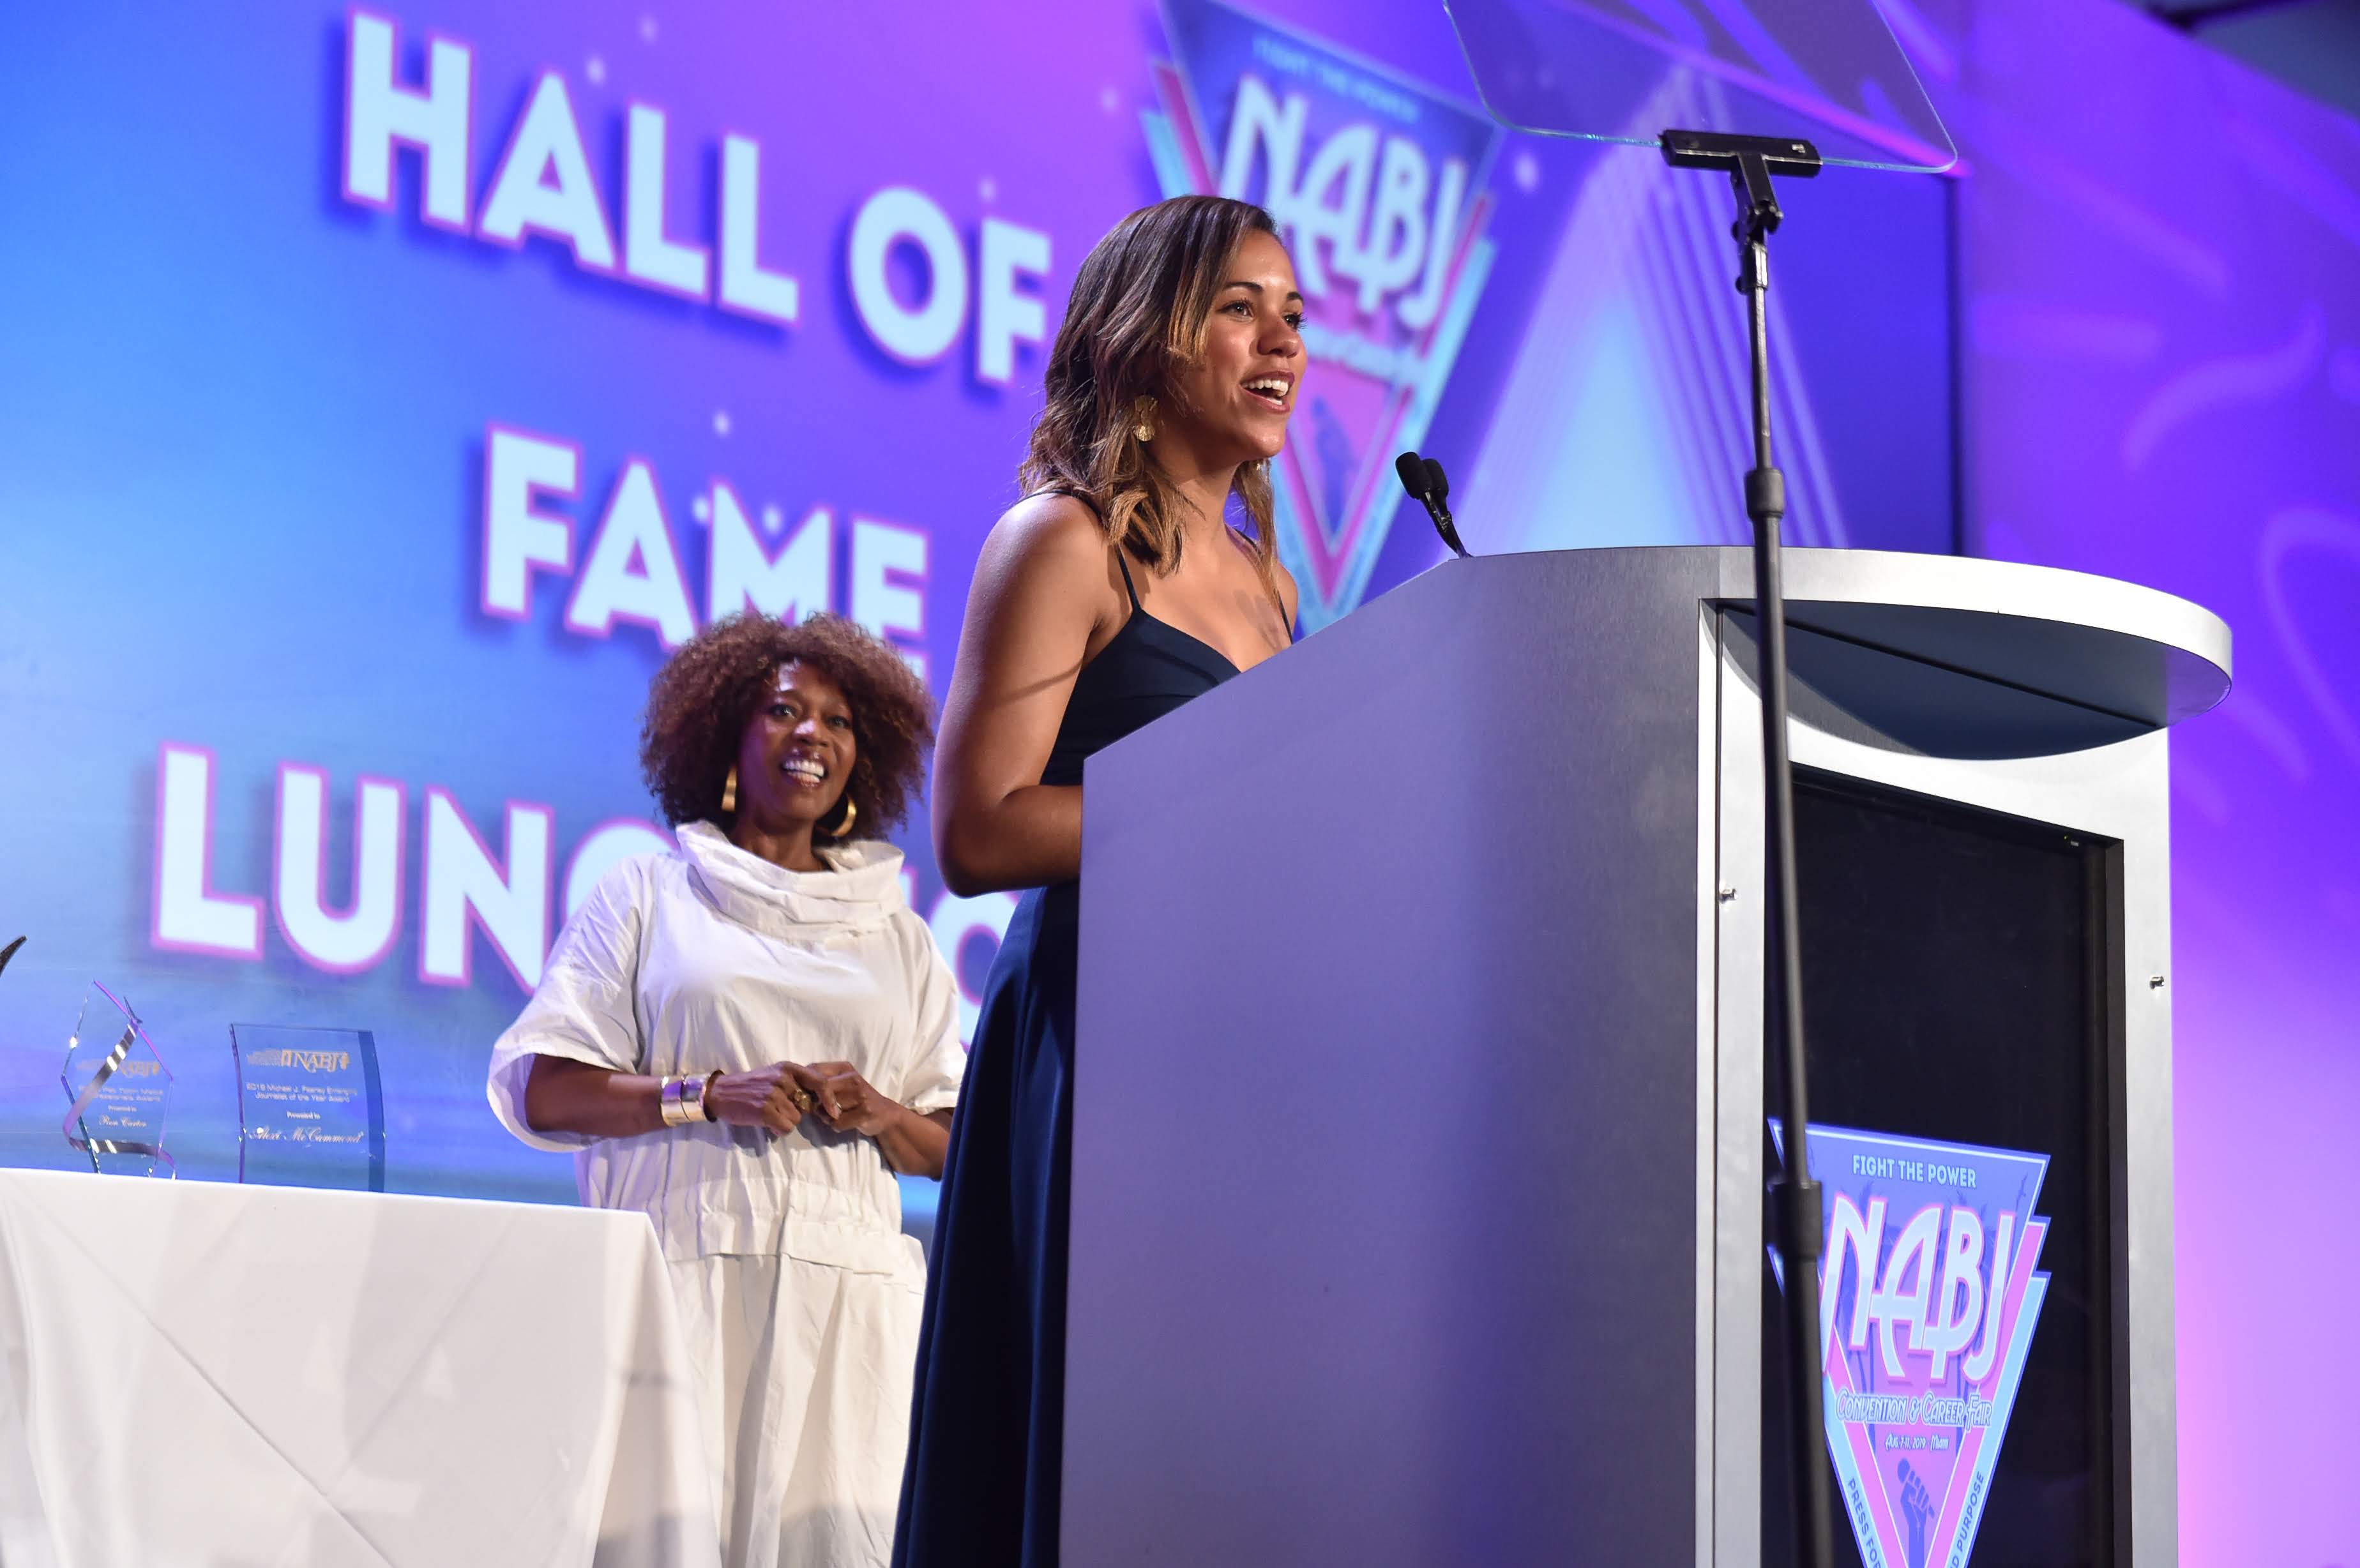 All they do is win: Black women sweep at Sunday's Critics Choice Awards  NABJ Black News & Views